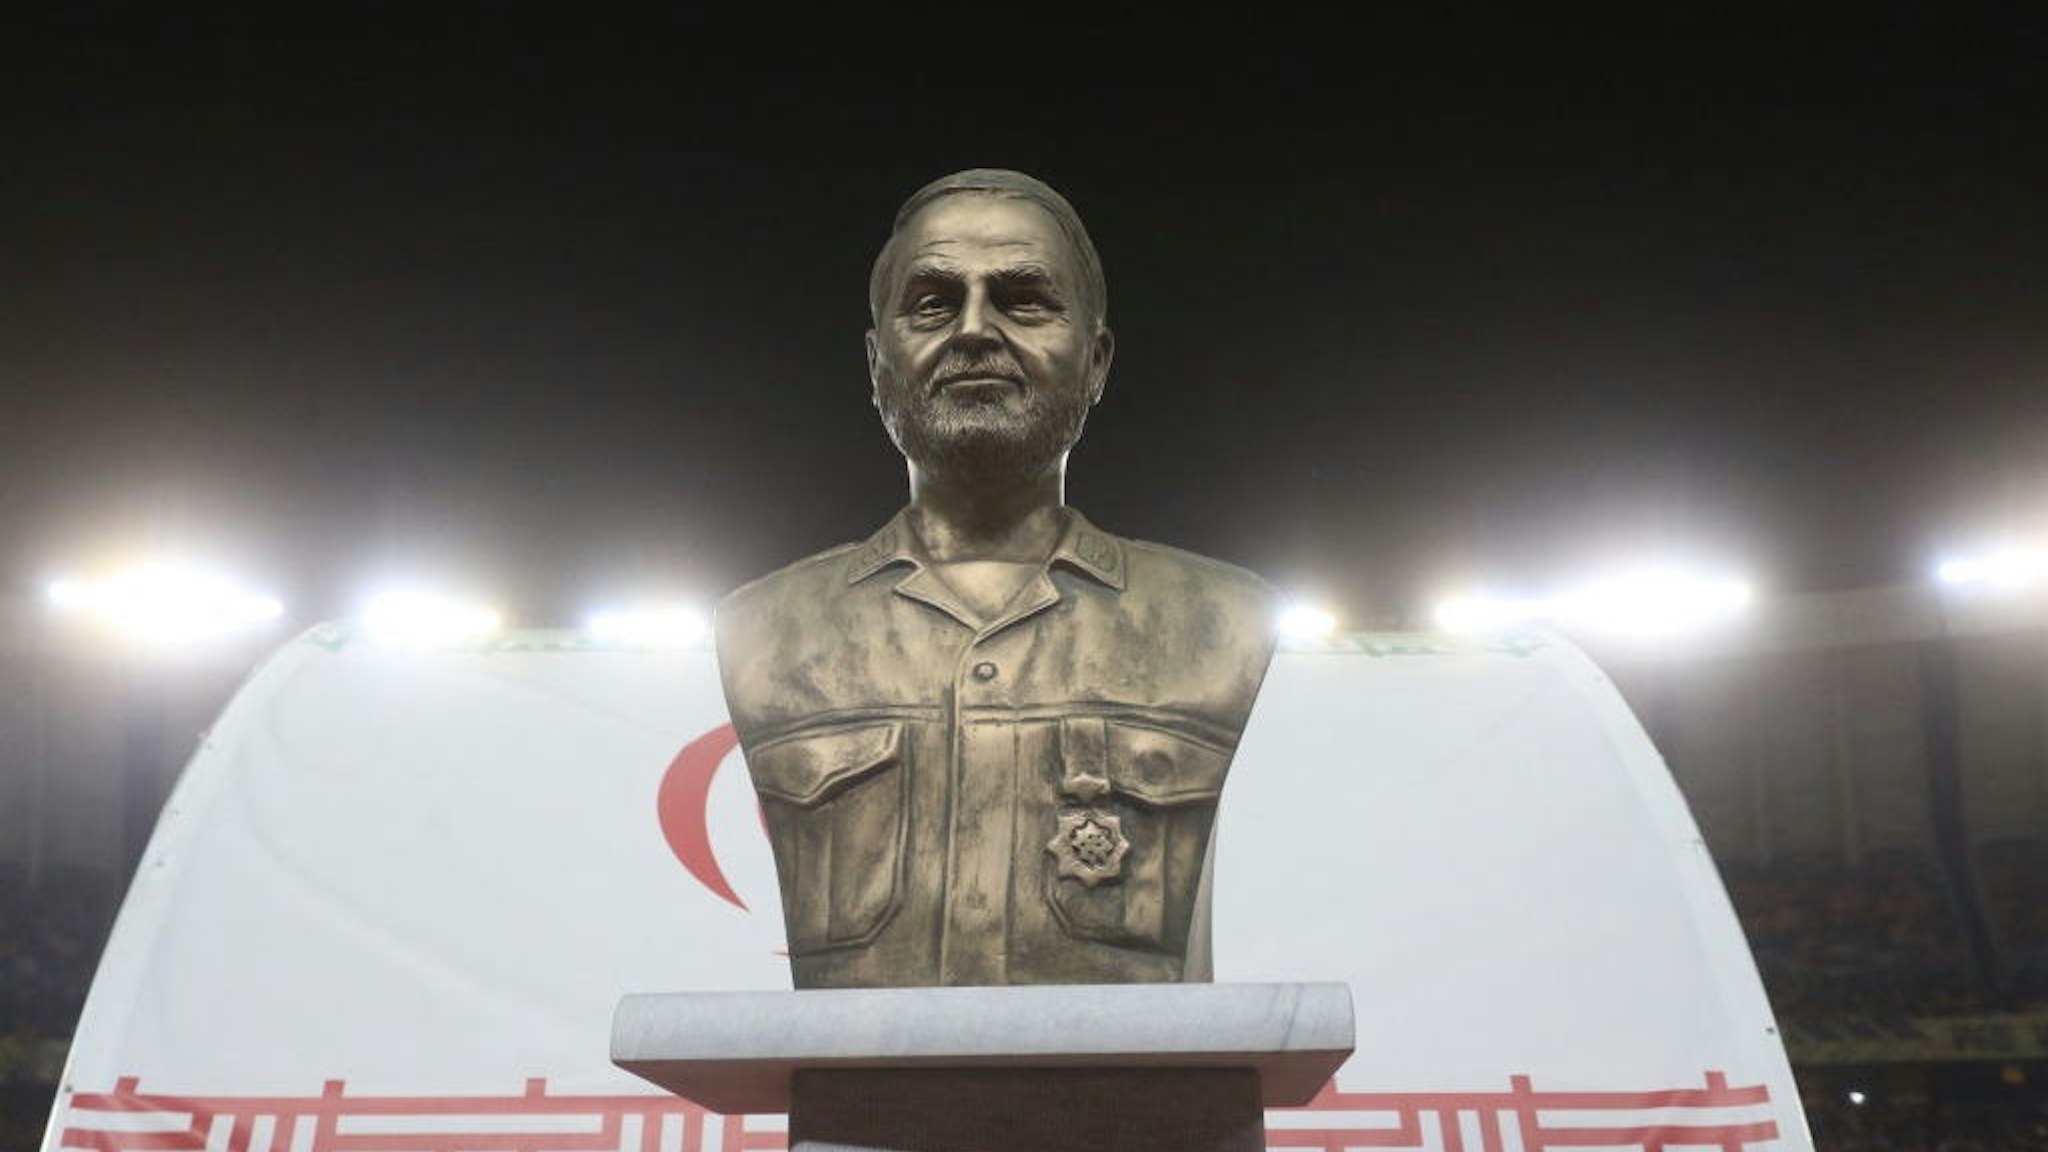 A bust of slain Iranian Revolutionary Guards (IRGC) commander Qasem Soleimani is displayed before the pitch at the Naghsh-e-Jahan Stadium in Isfahan during the AFC Champions League Group C football match between Iran's Sepahan and Saudi Arabia's Al-Ittihad on October 2, 2023. (Photo by MORTEZA SALEHI/TASNIM NEWS/AFP via Getty Images)